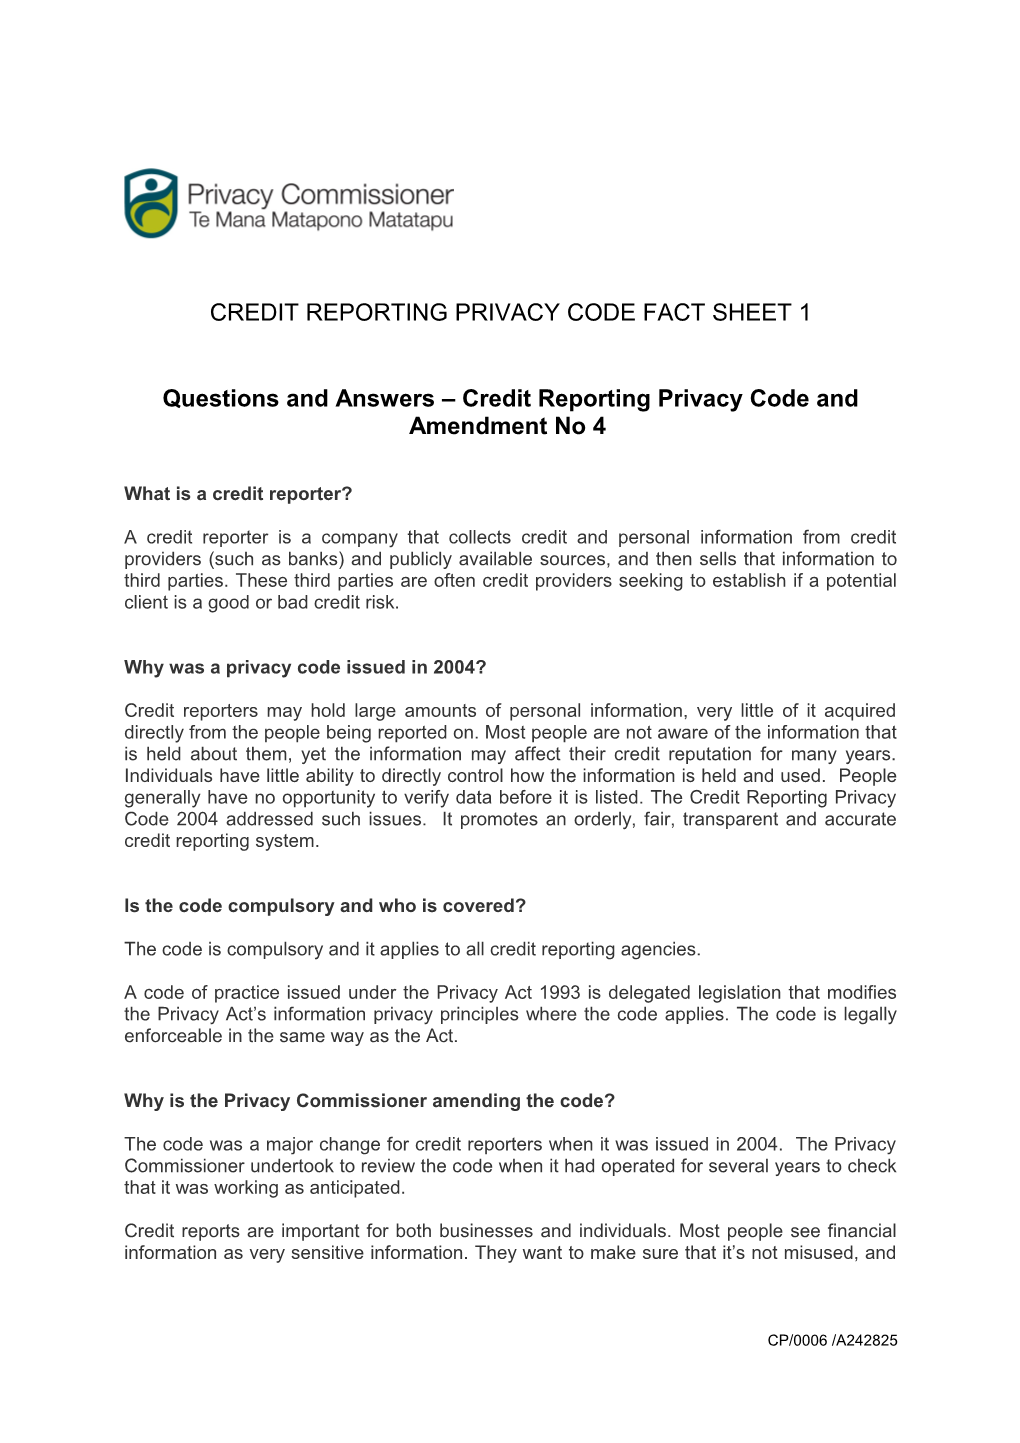 Questions and Answers Credit Reporting Privacy Code and Amendment No 4